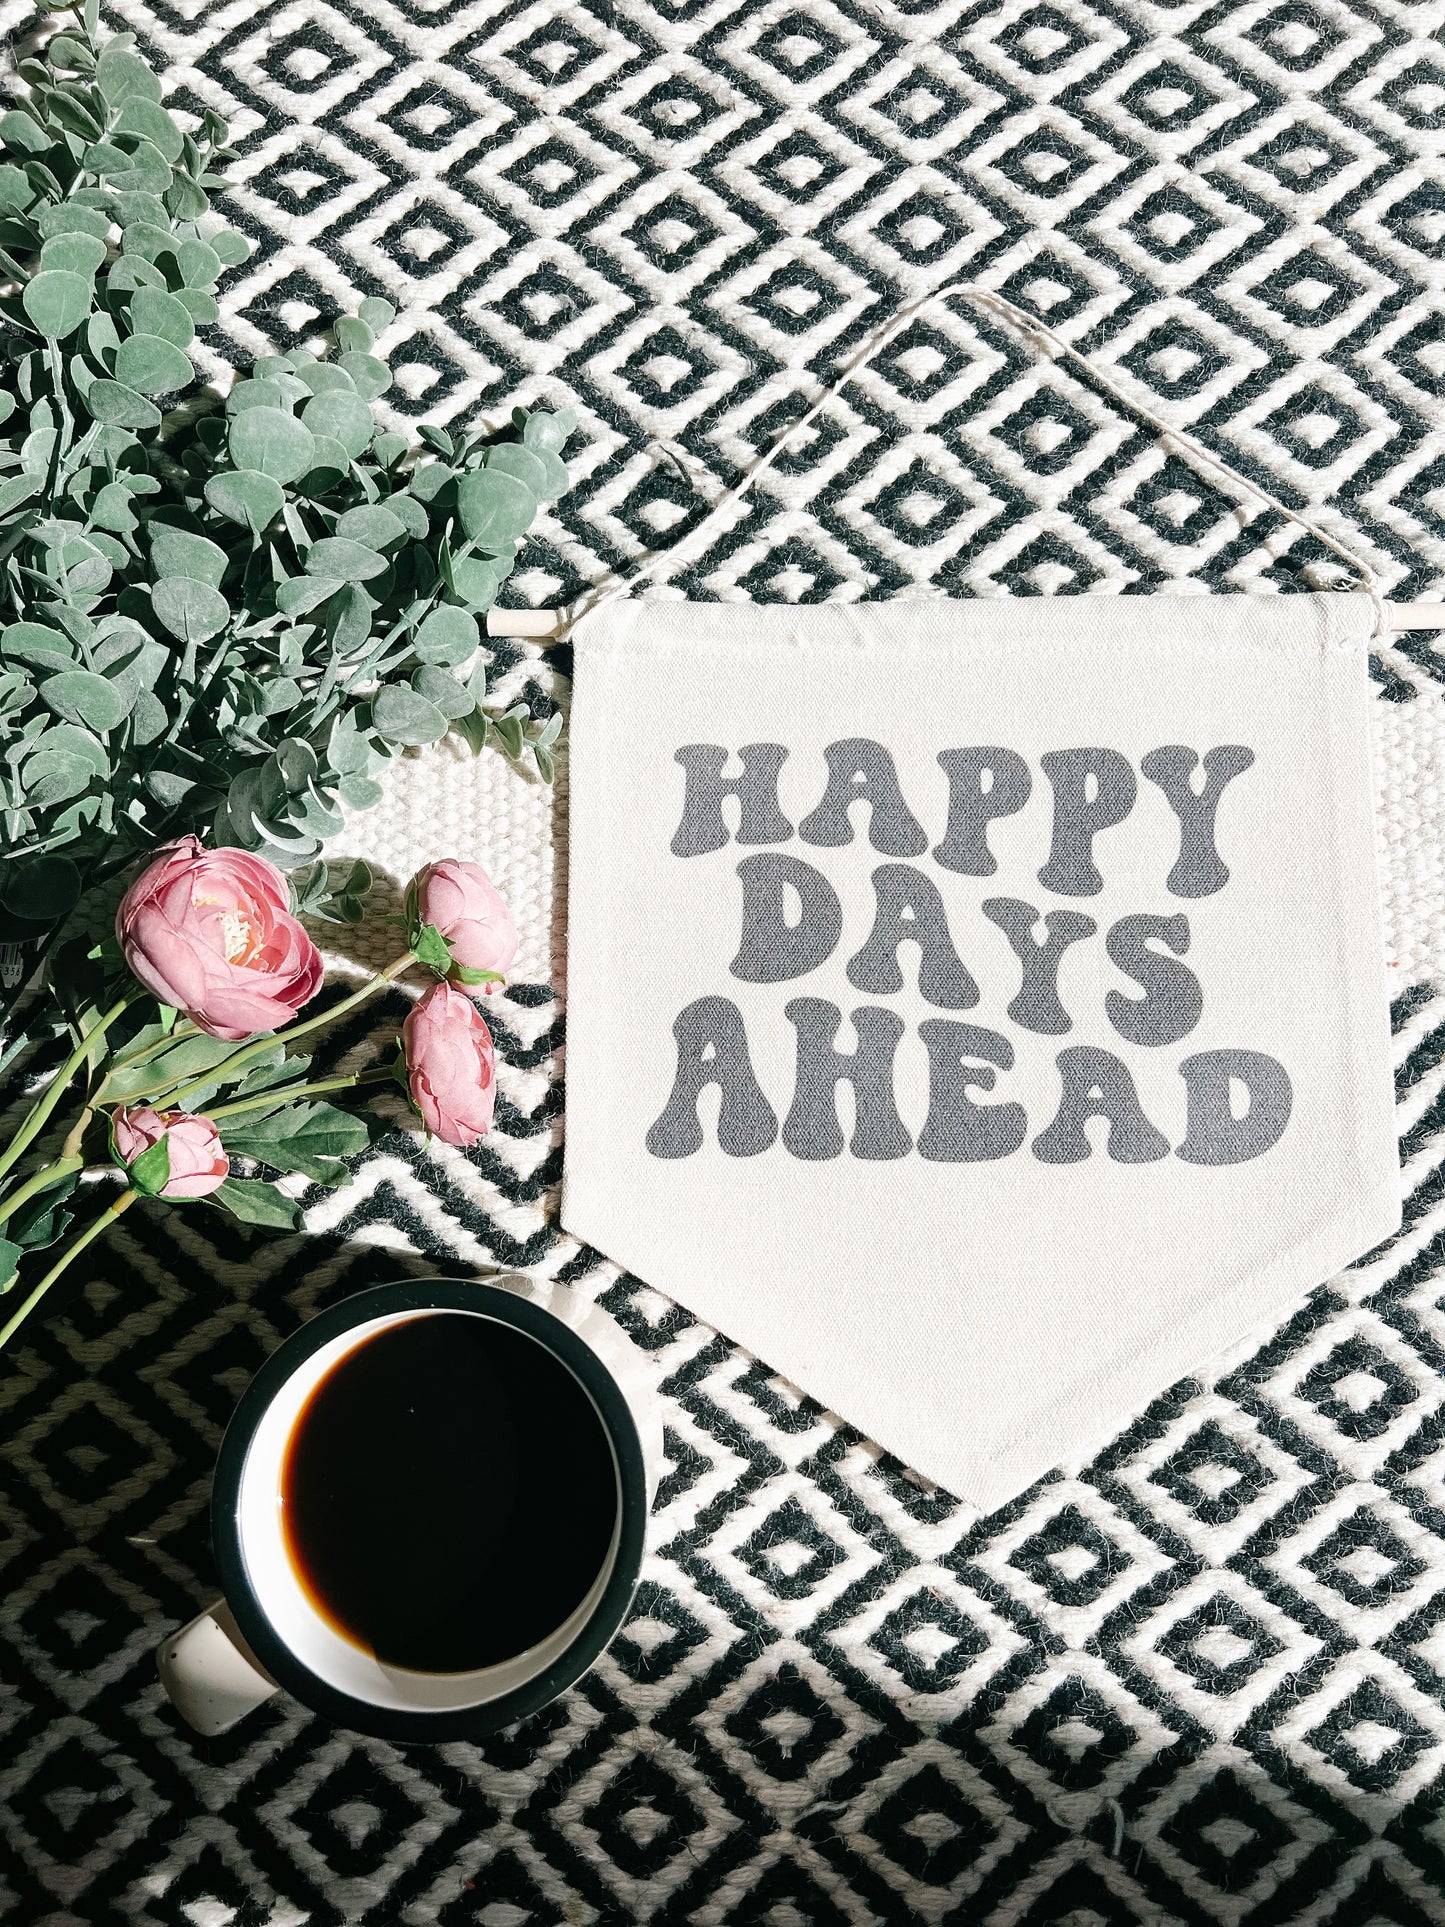 Happy Days Ahead Canvas Banner